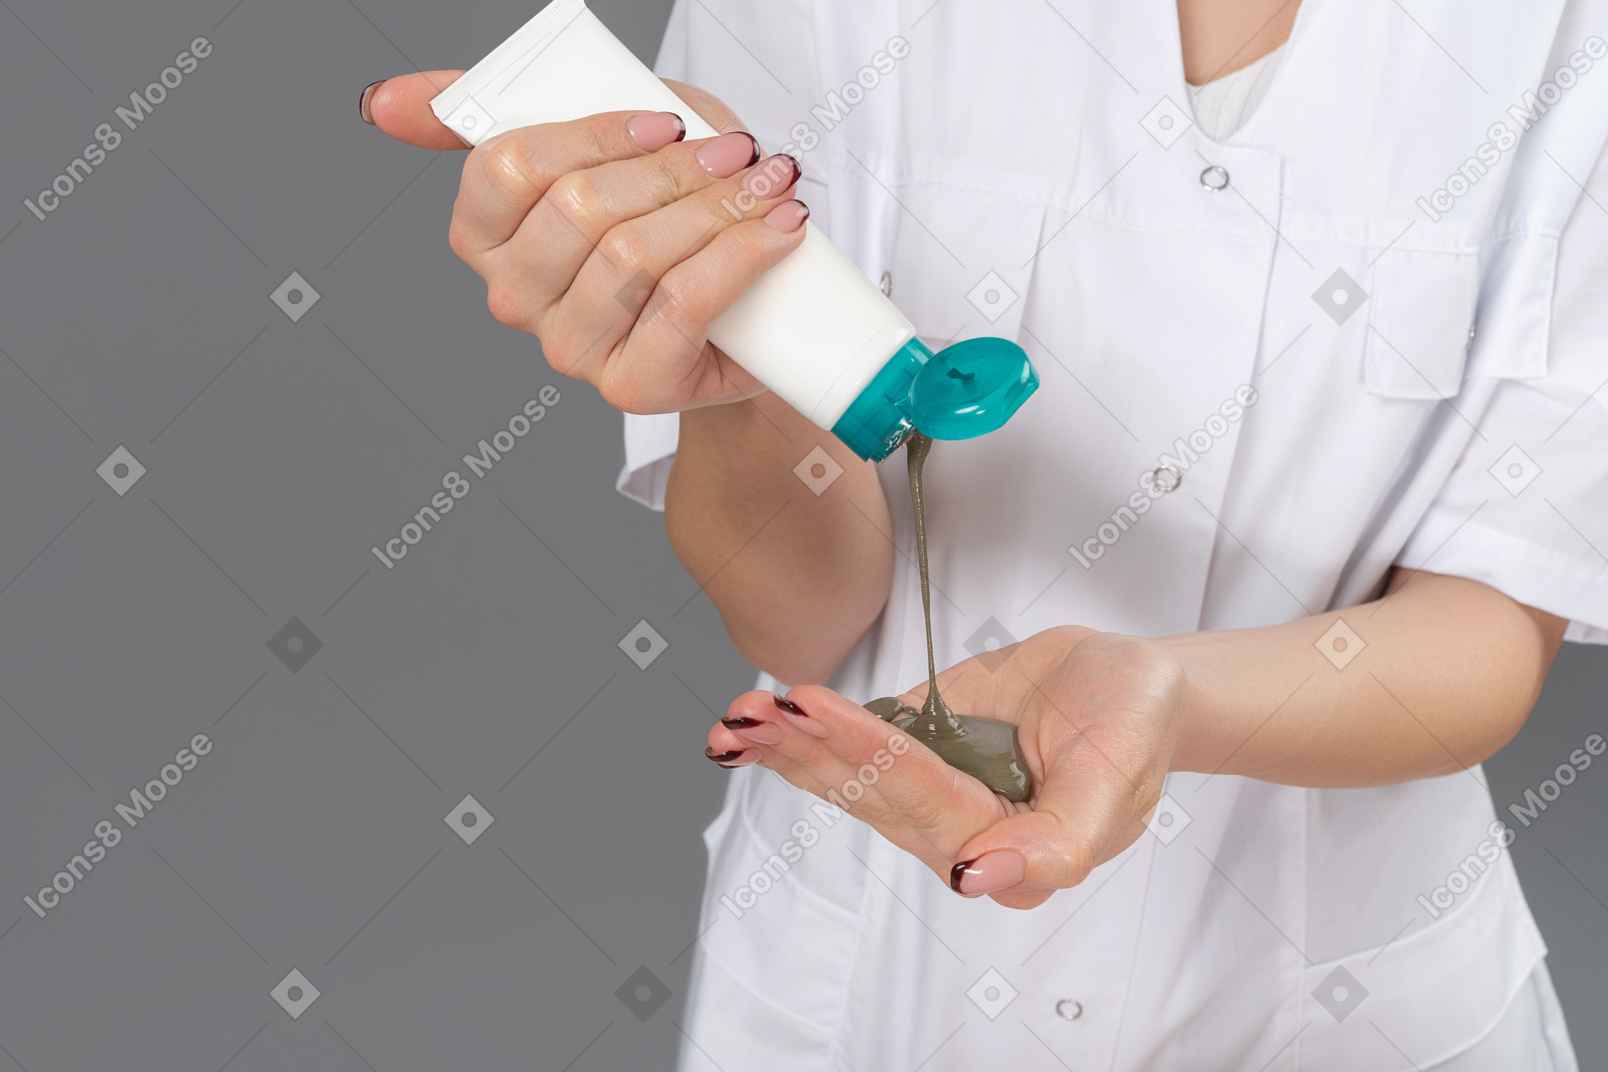 Squeezing a lotion on hand